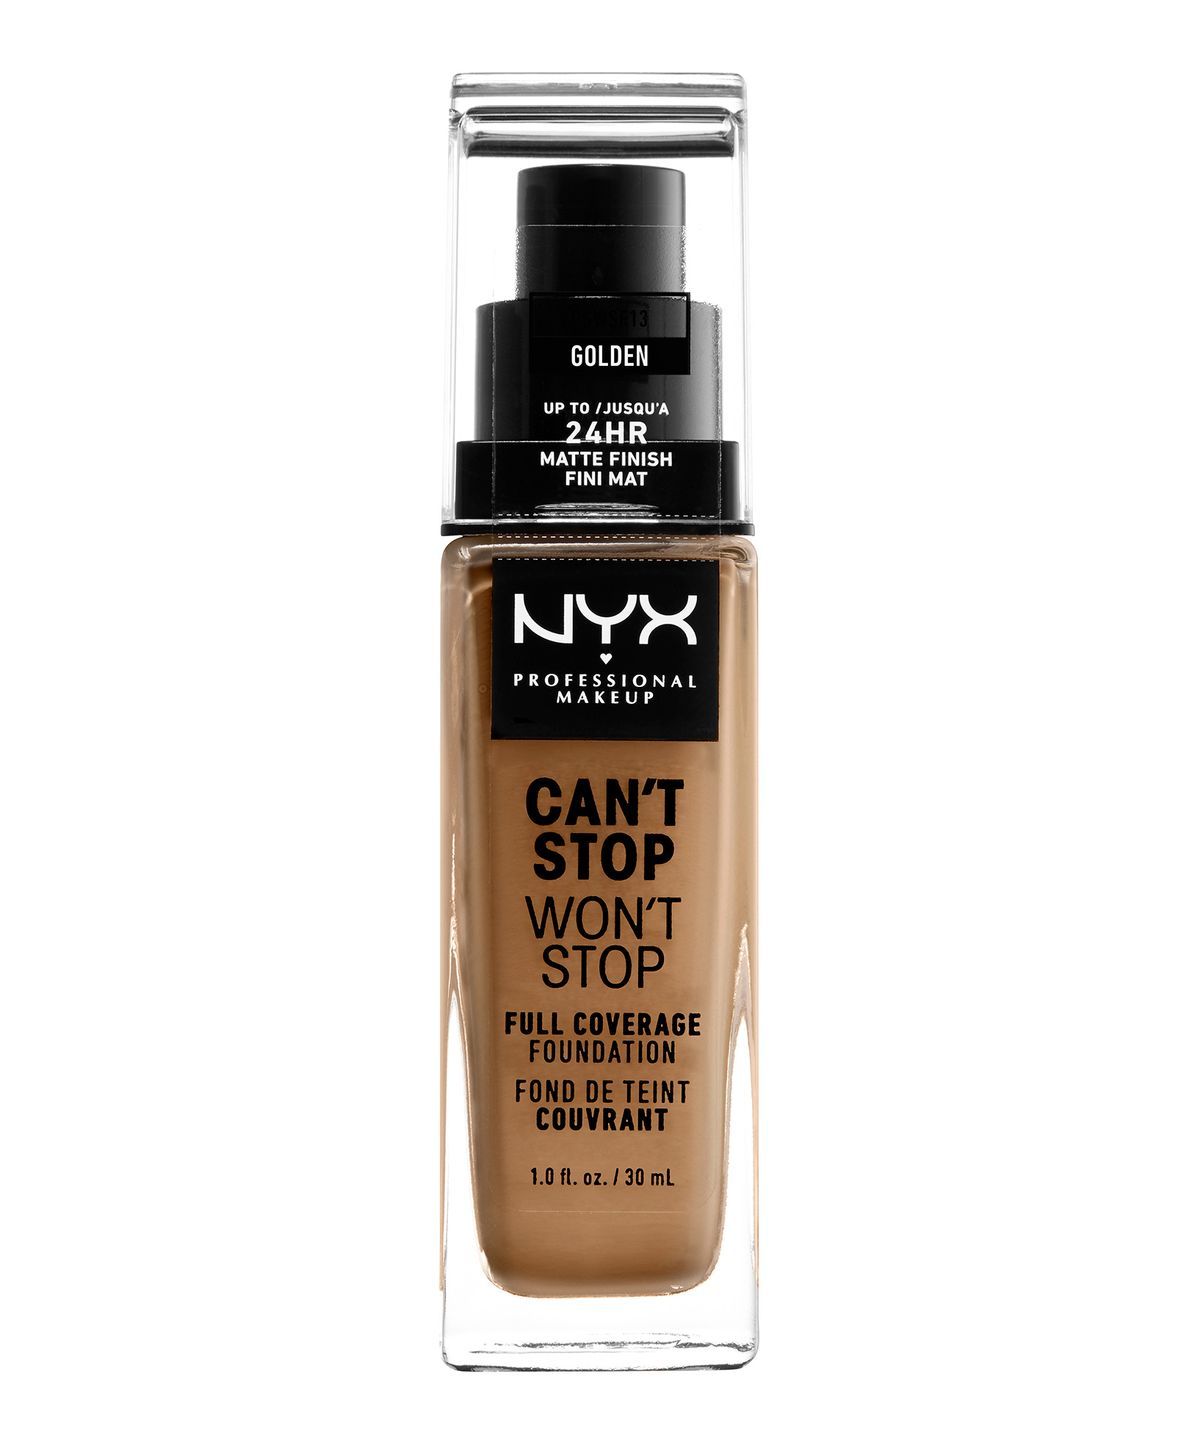 CANT STOP WONT STOP 24HR FOUNDATION GOLDEN - NYX PROFESSIONAL MAKEUP